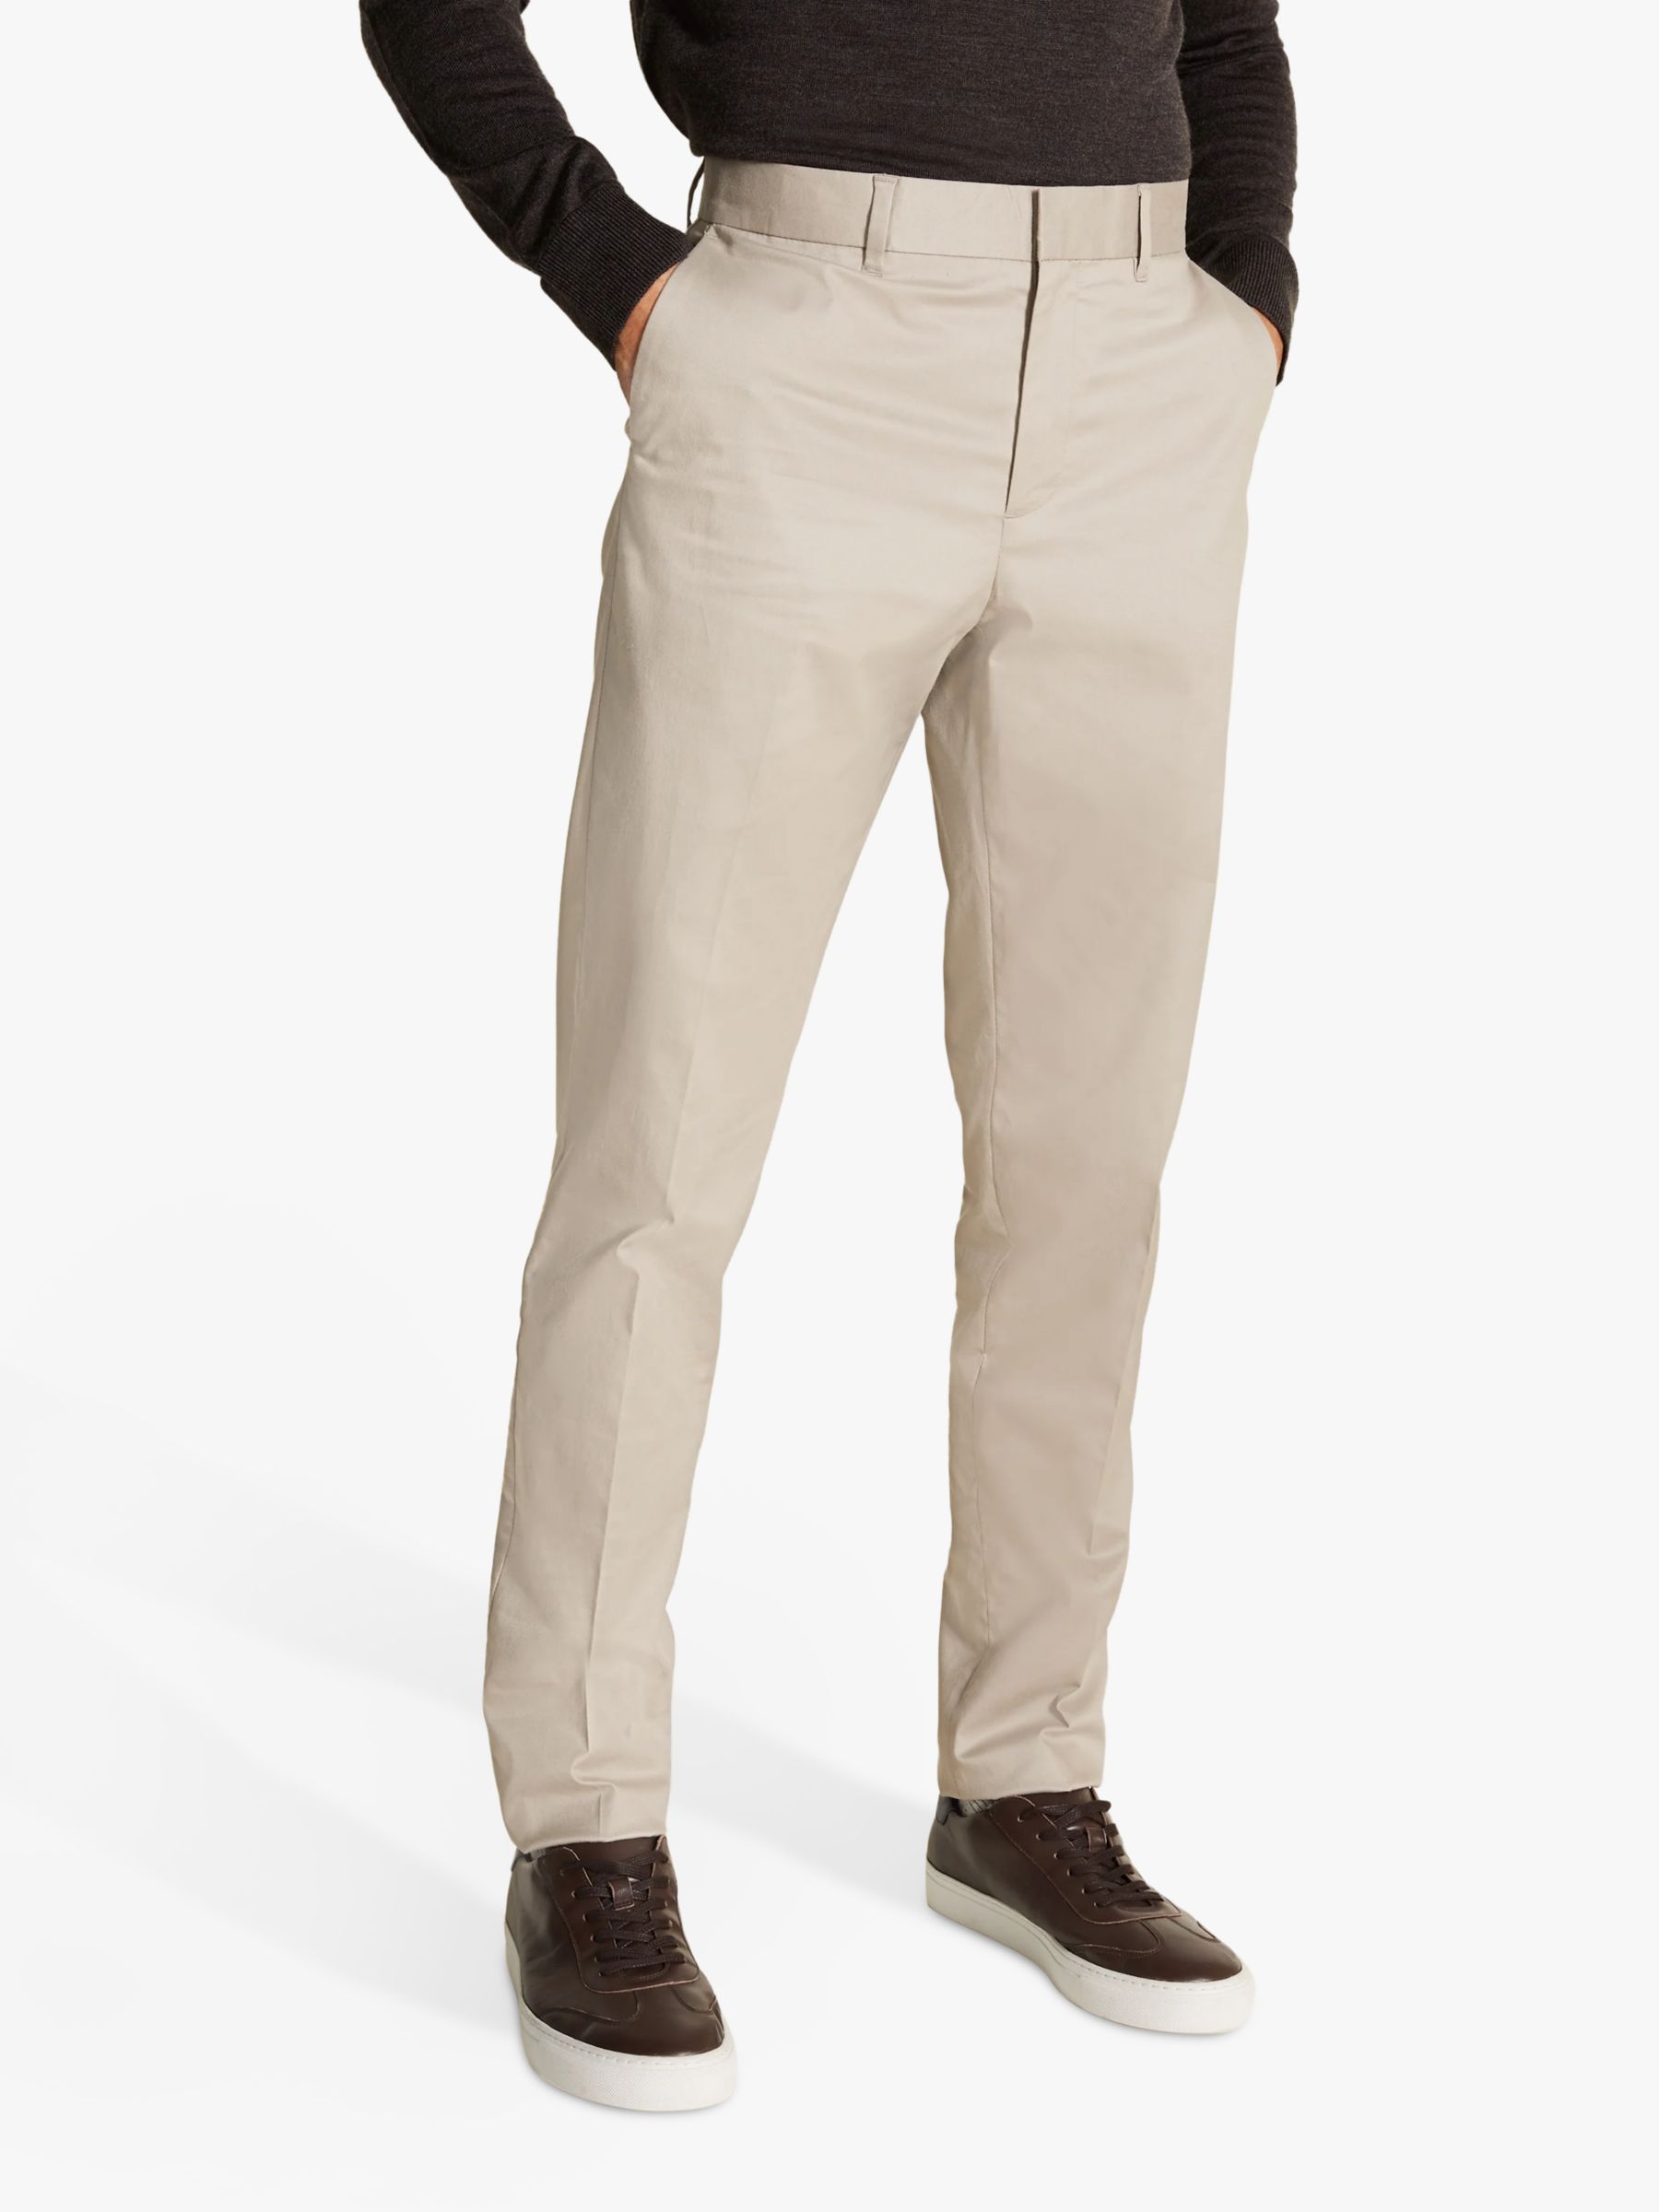 Moss 1851 Slim Fit Stretch Chinos, Stone at John Lewis & Partners